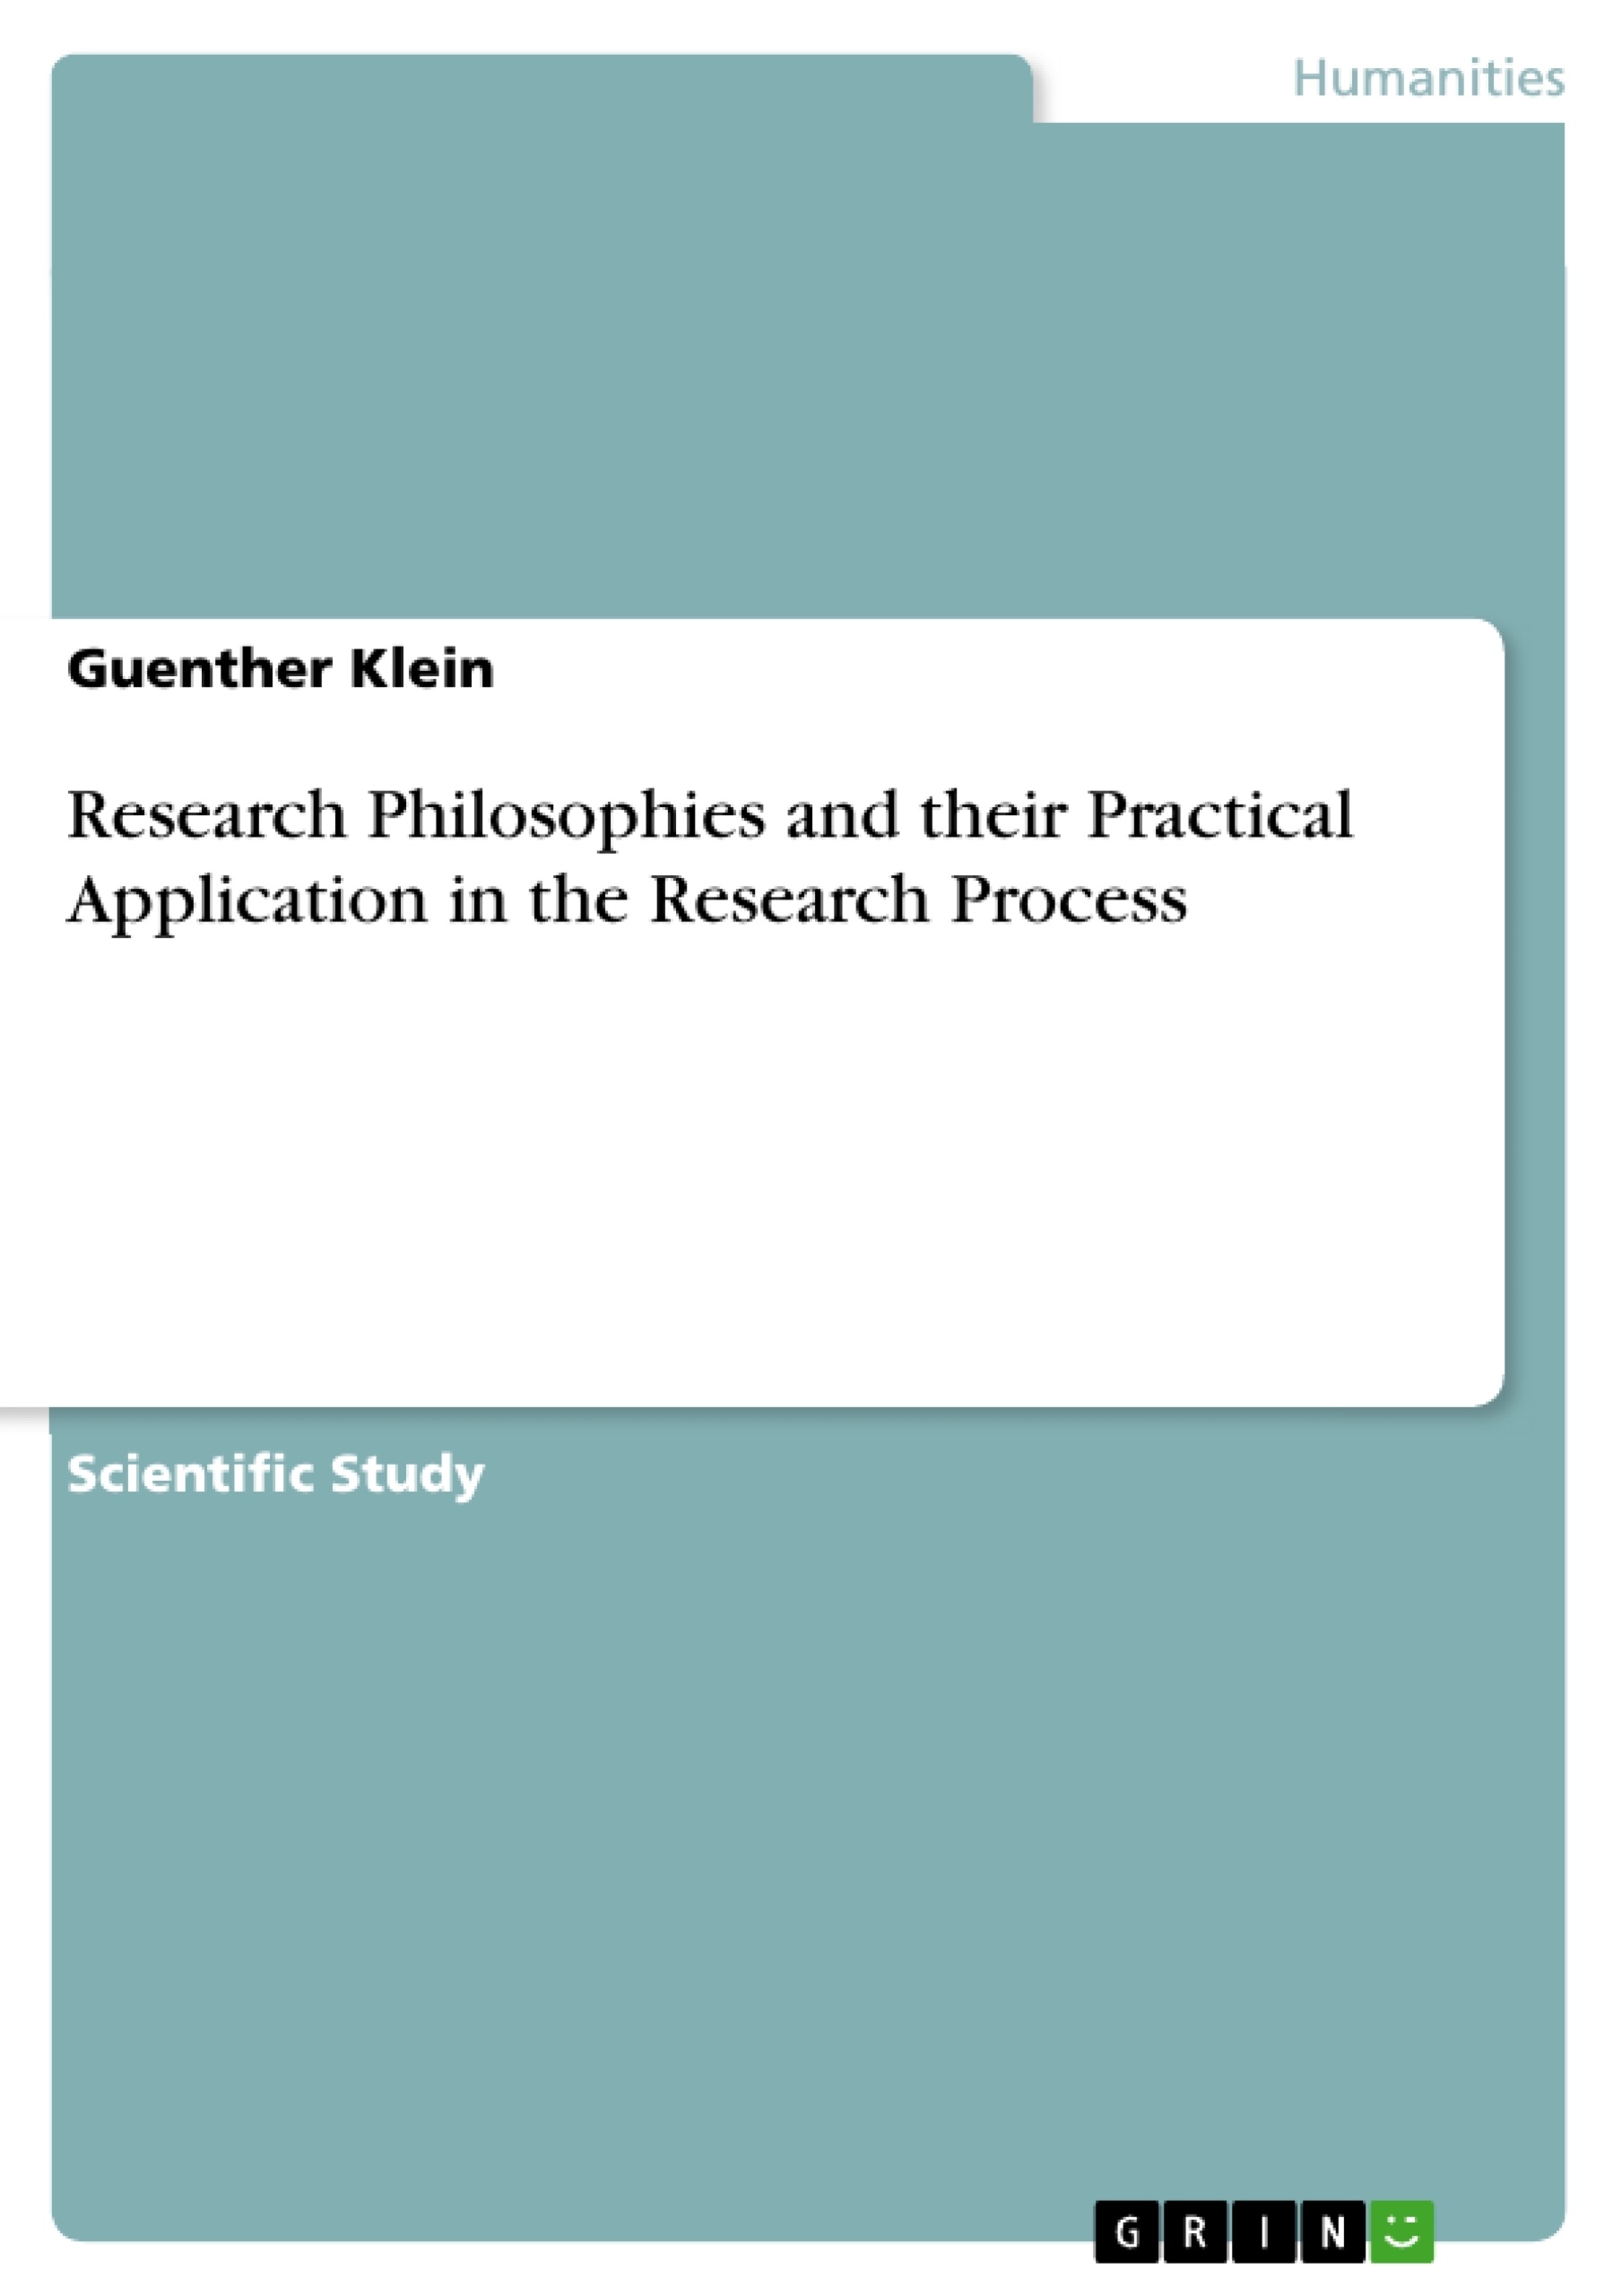 Title: Research Philosophies and their Practical Application in the Research Process